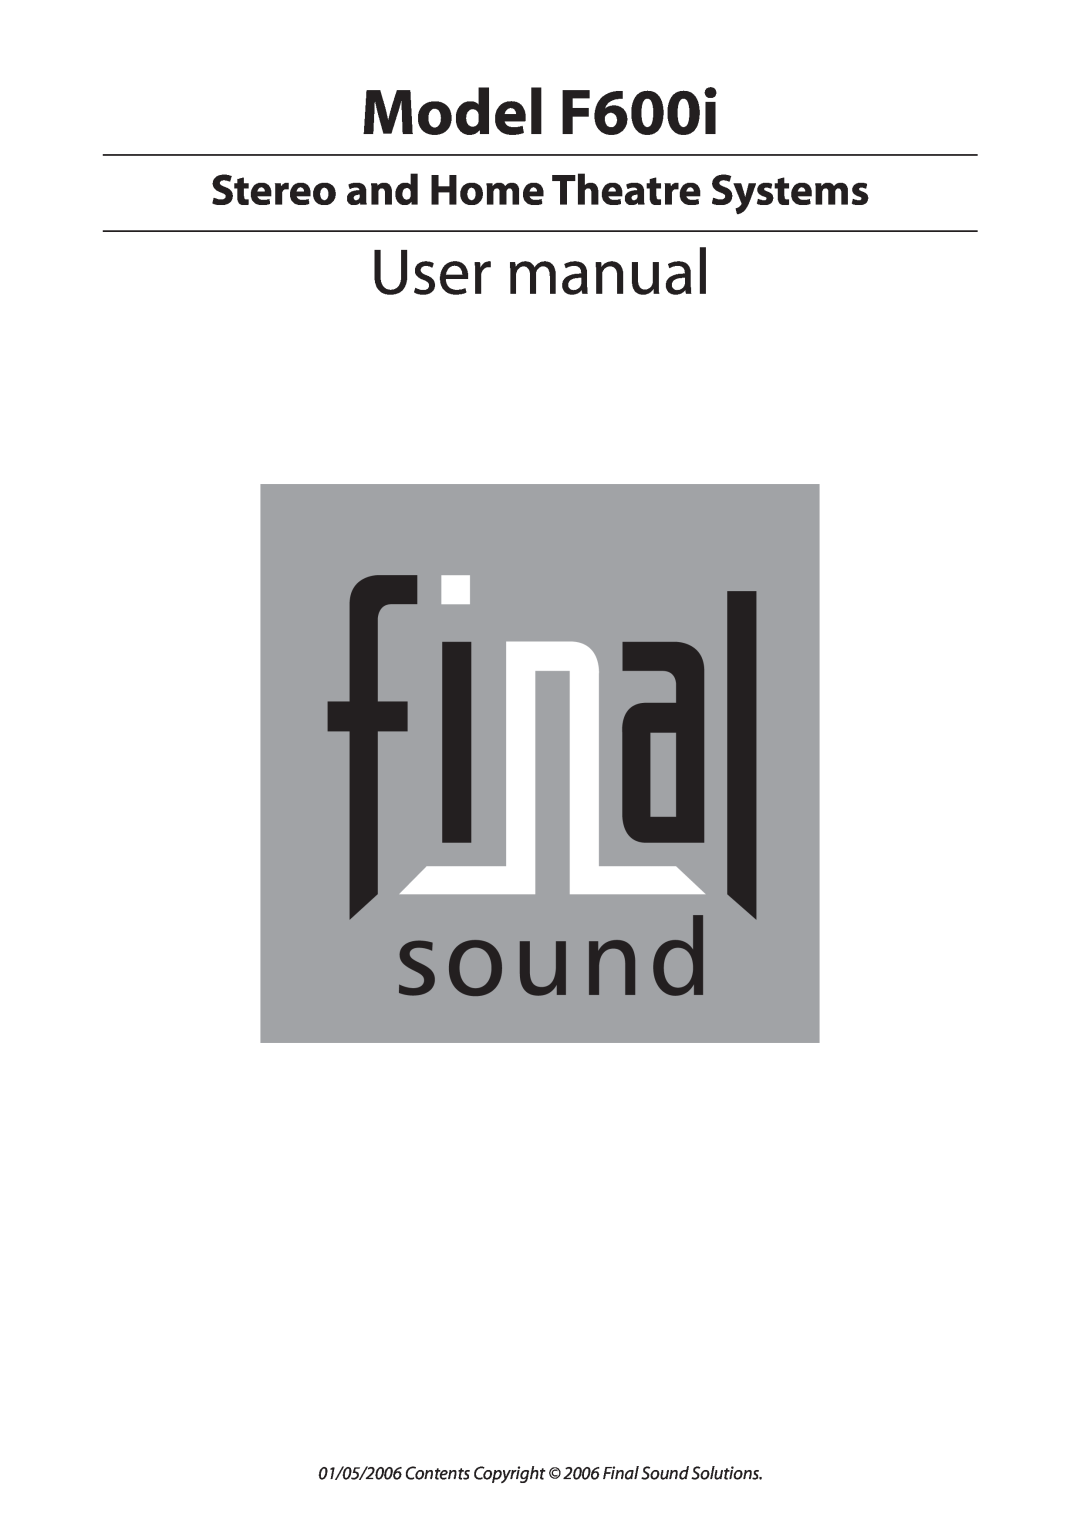 Final Sound user manual Model F600i, Stereo and Home Theatre Systems 